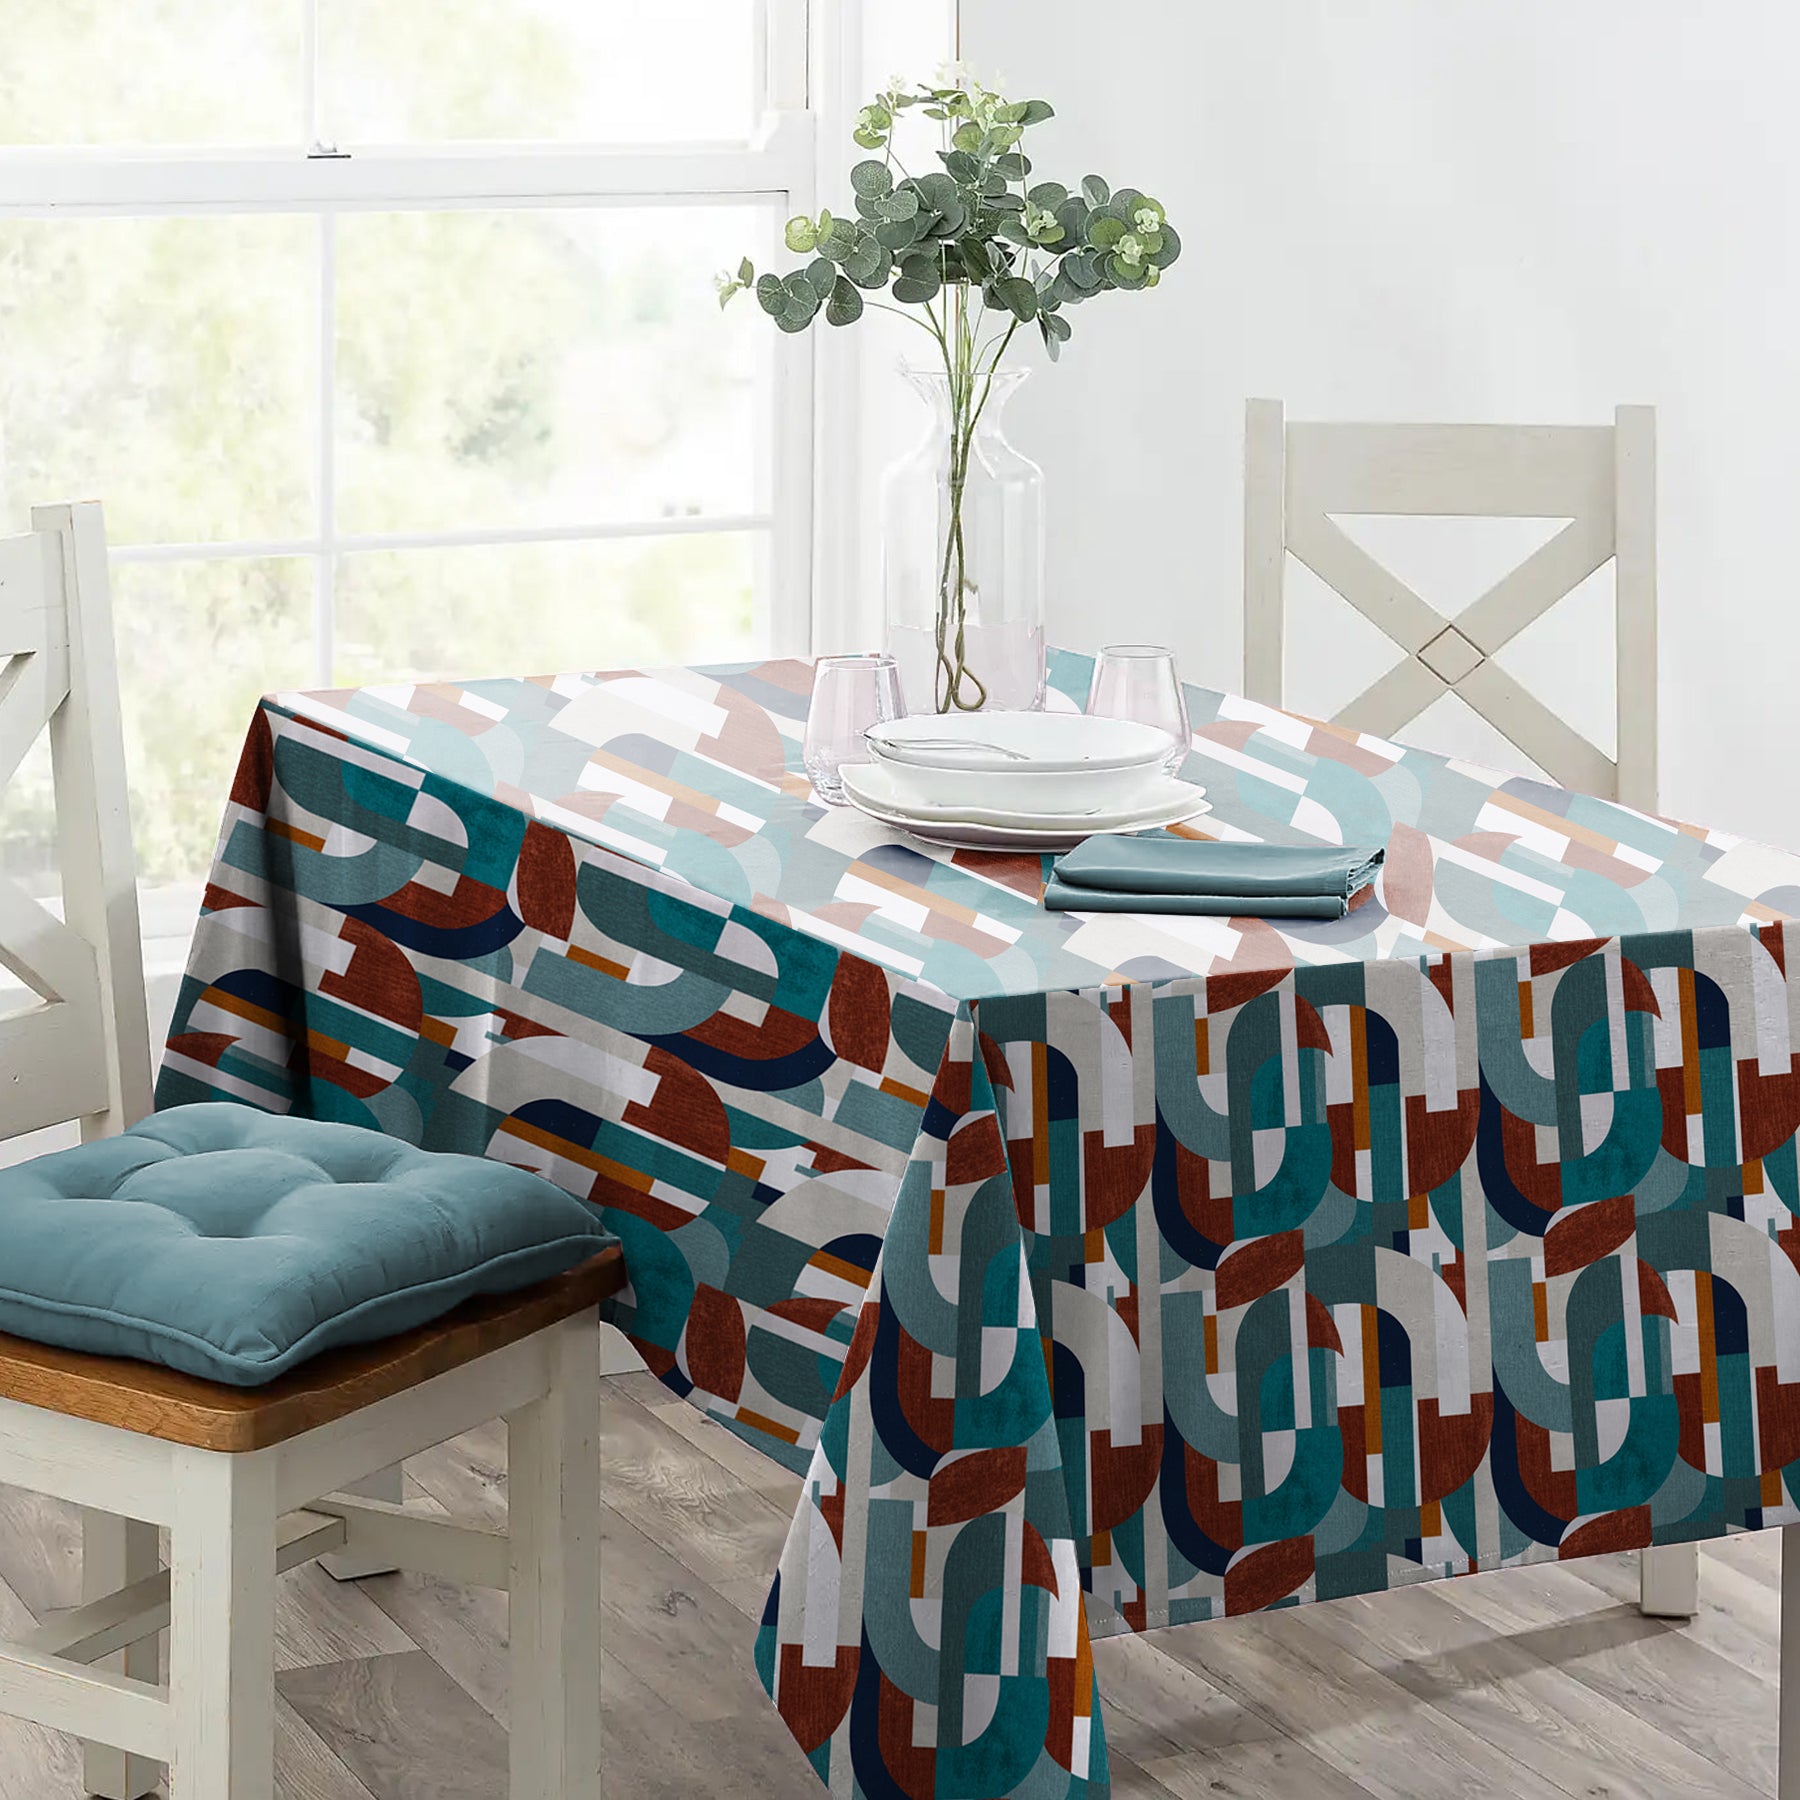 ILLUSION CURVES 6 SEATER TABLE CLOTH TEAL/BROWN